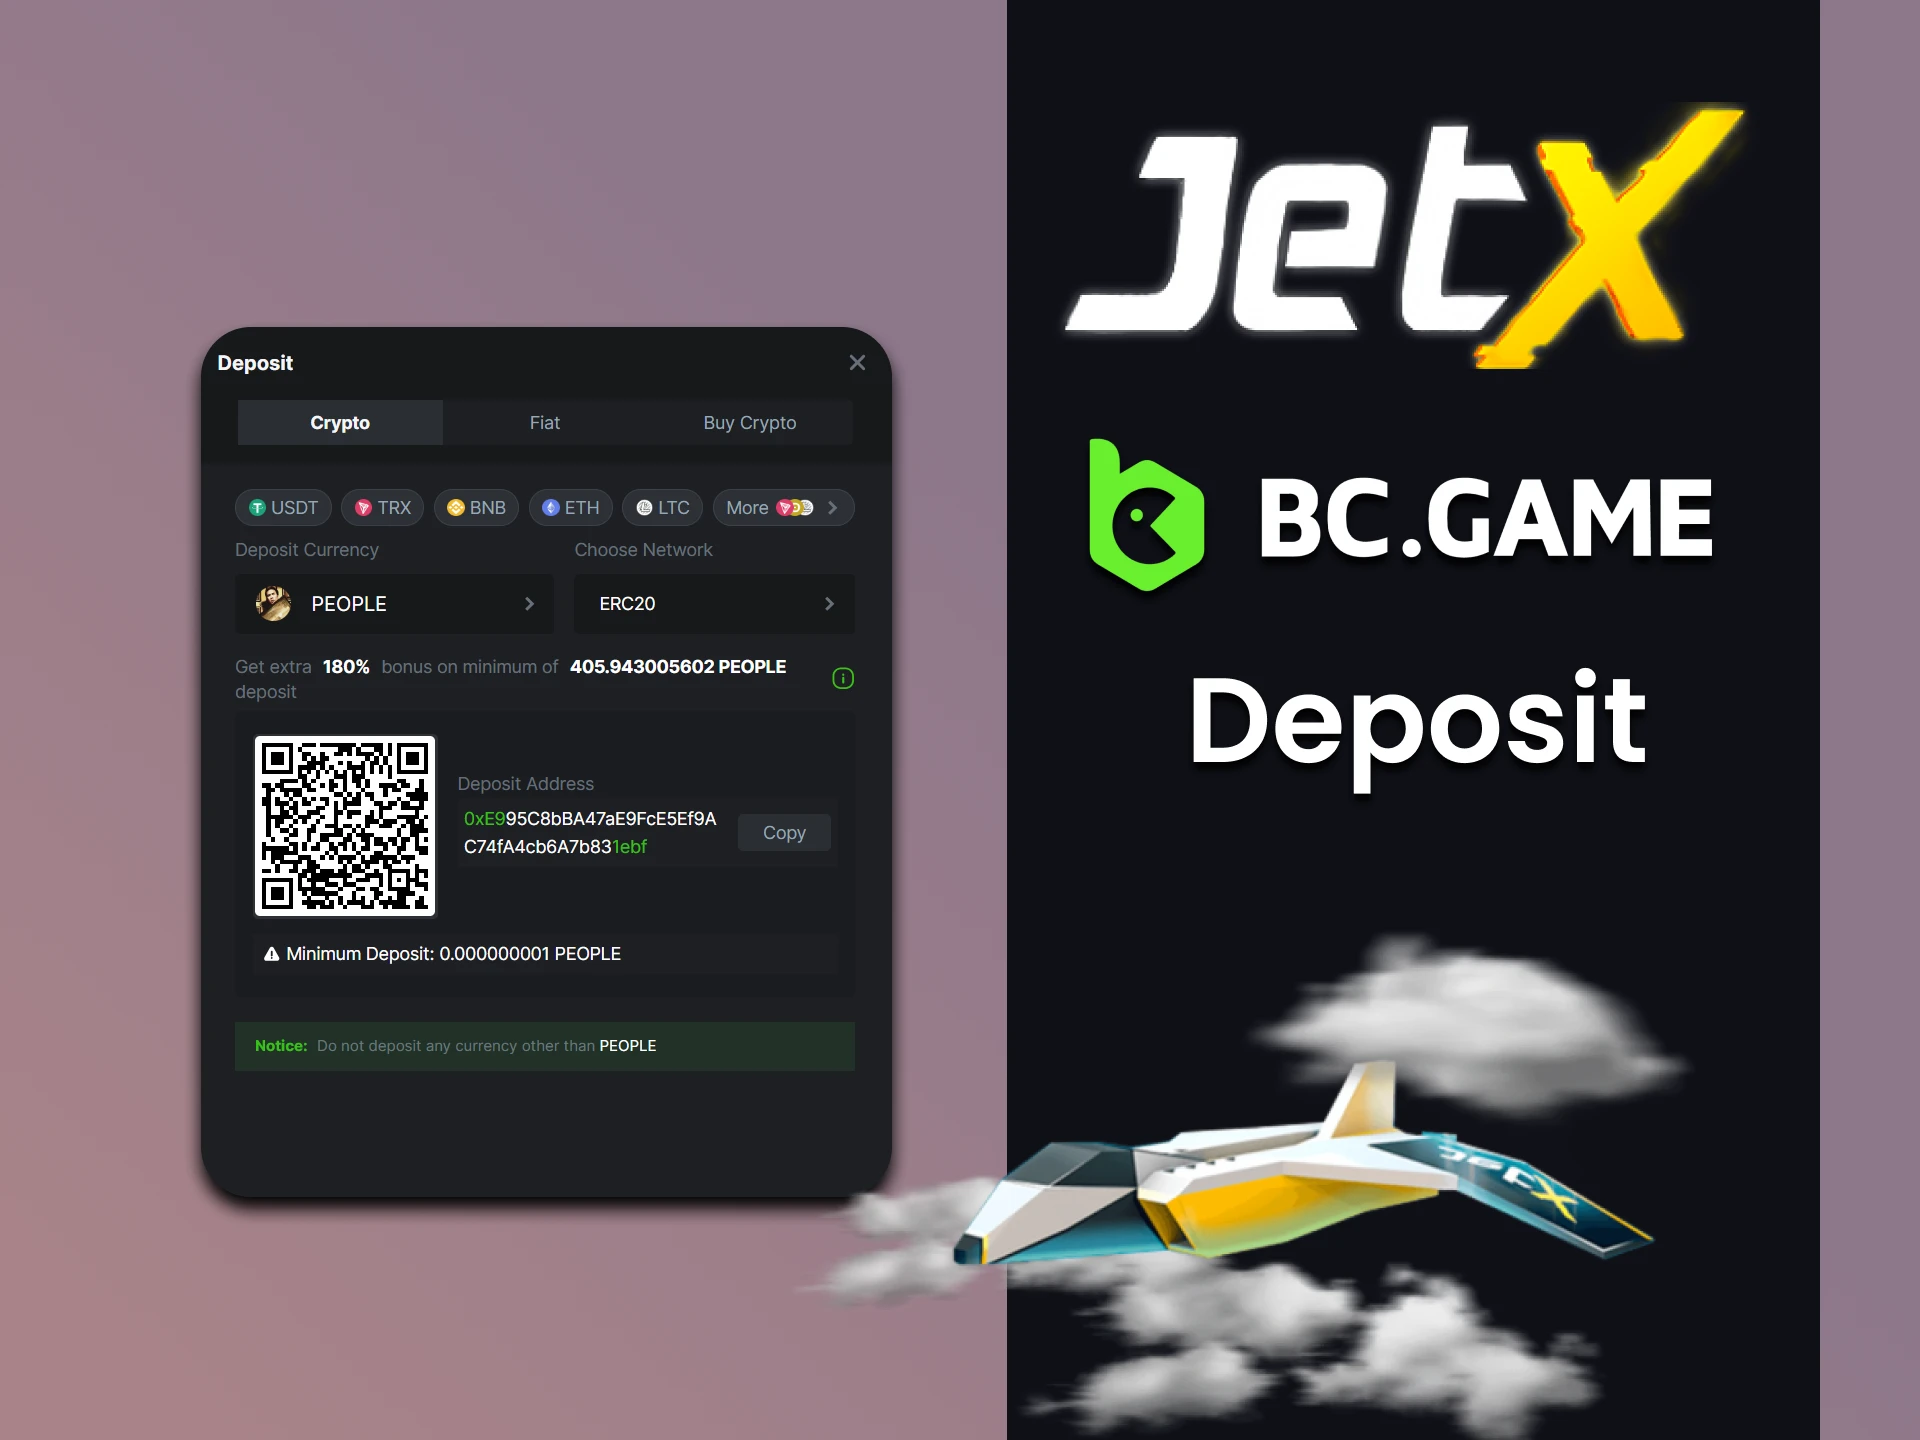 We will tell you how to top up funds for the JetX game on BC Game.